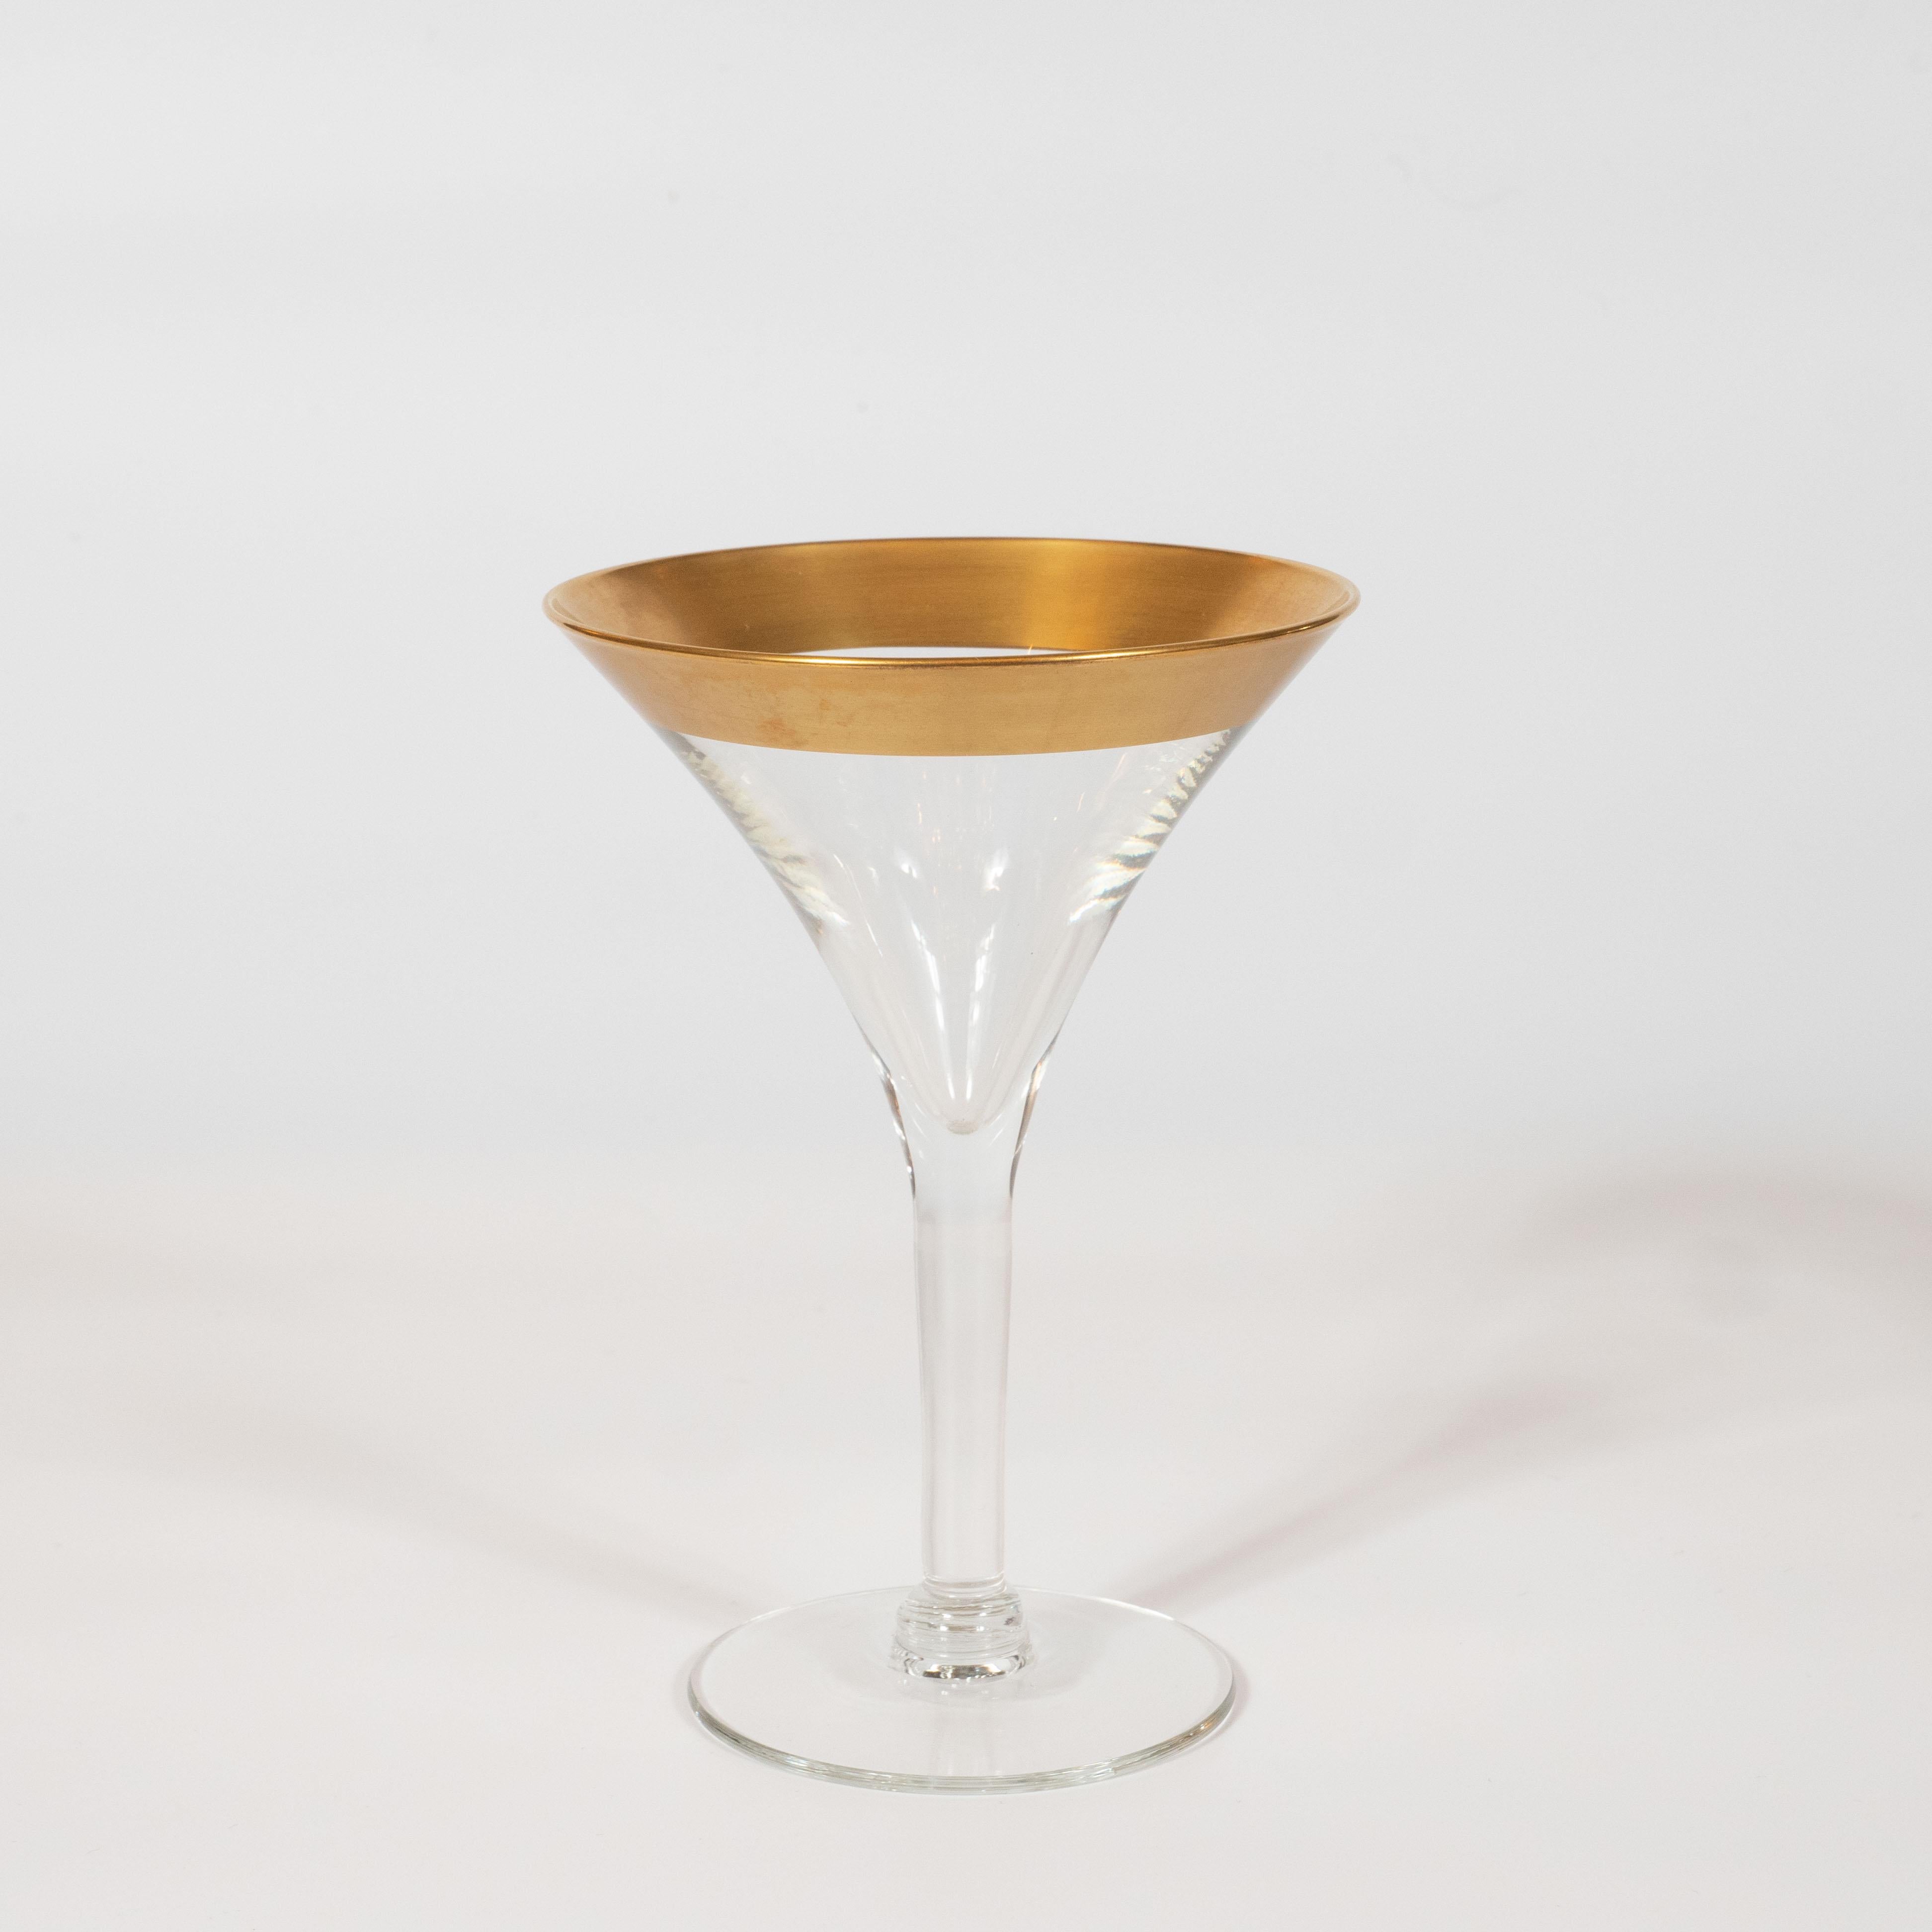 This elegant set of four champagne/martini glasses were realized by the esteemed Mid-Century Modern designer, Dorothy Thorpe, circa 1945. They feature 24-karat gold rims- an exceptionally rare and sought after edition of this iconic glasses set-